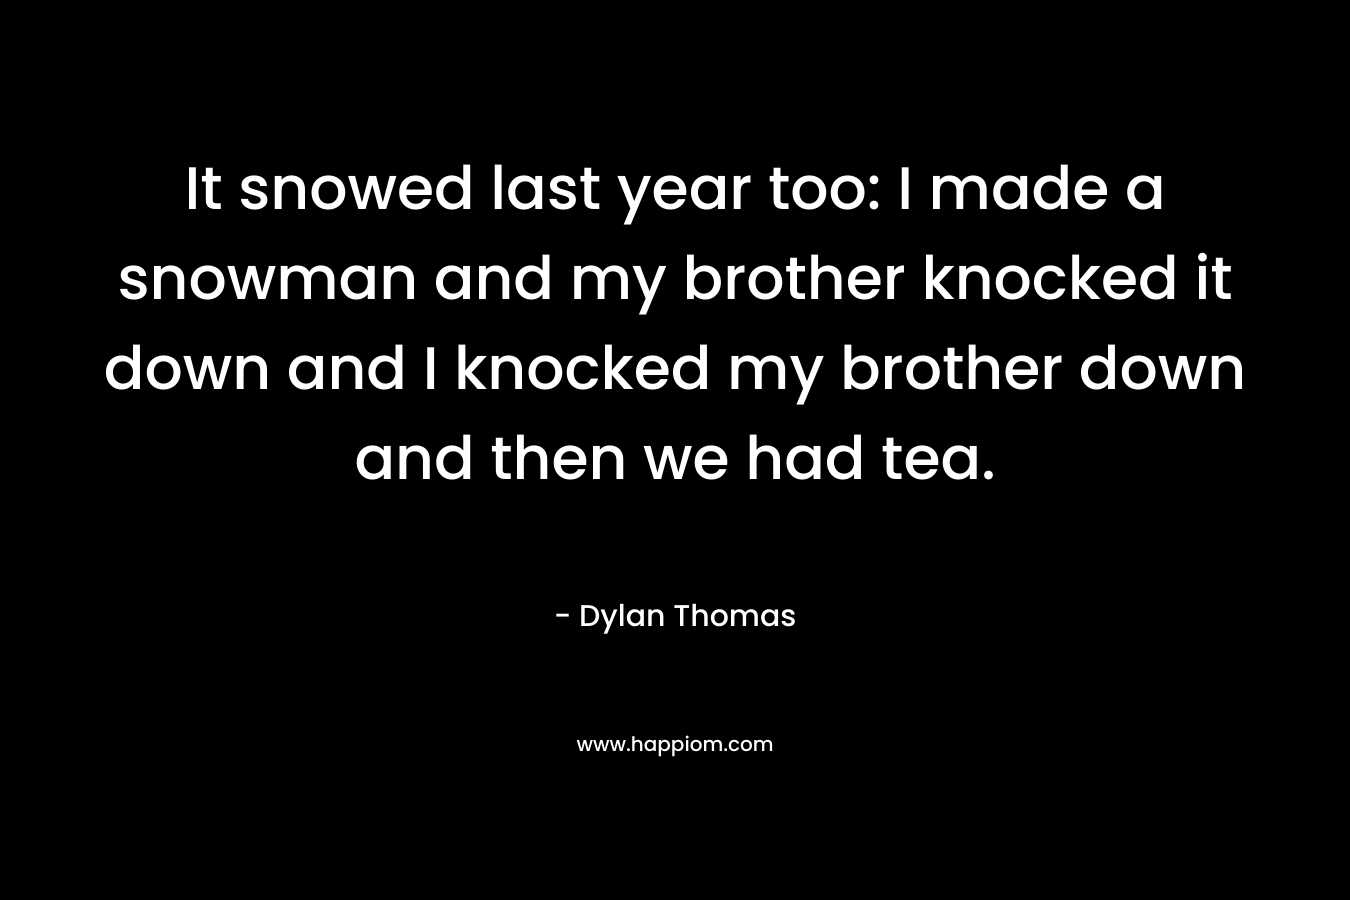 It snowed last year too: I made a snowman and my brother knocked it down and I knocked my brother down and then we had tea.